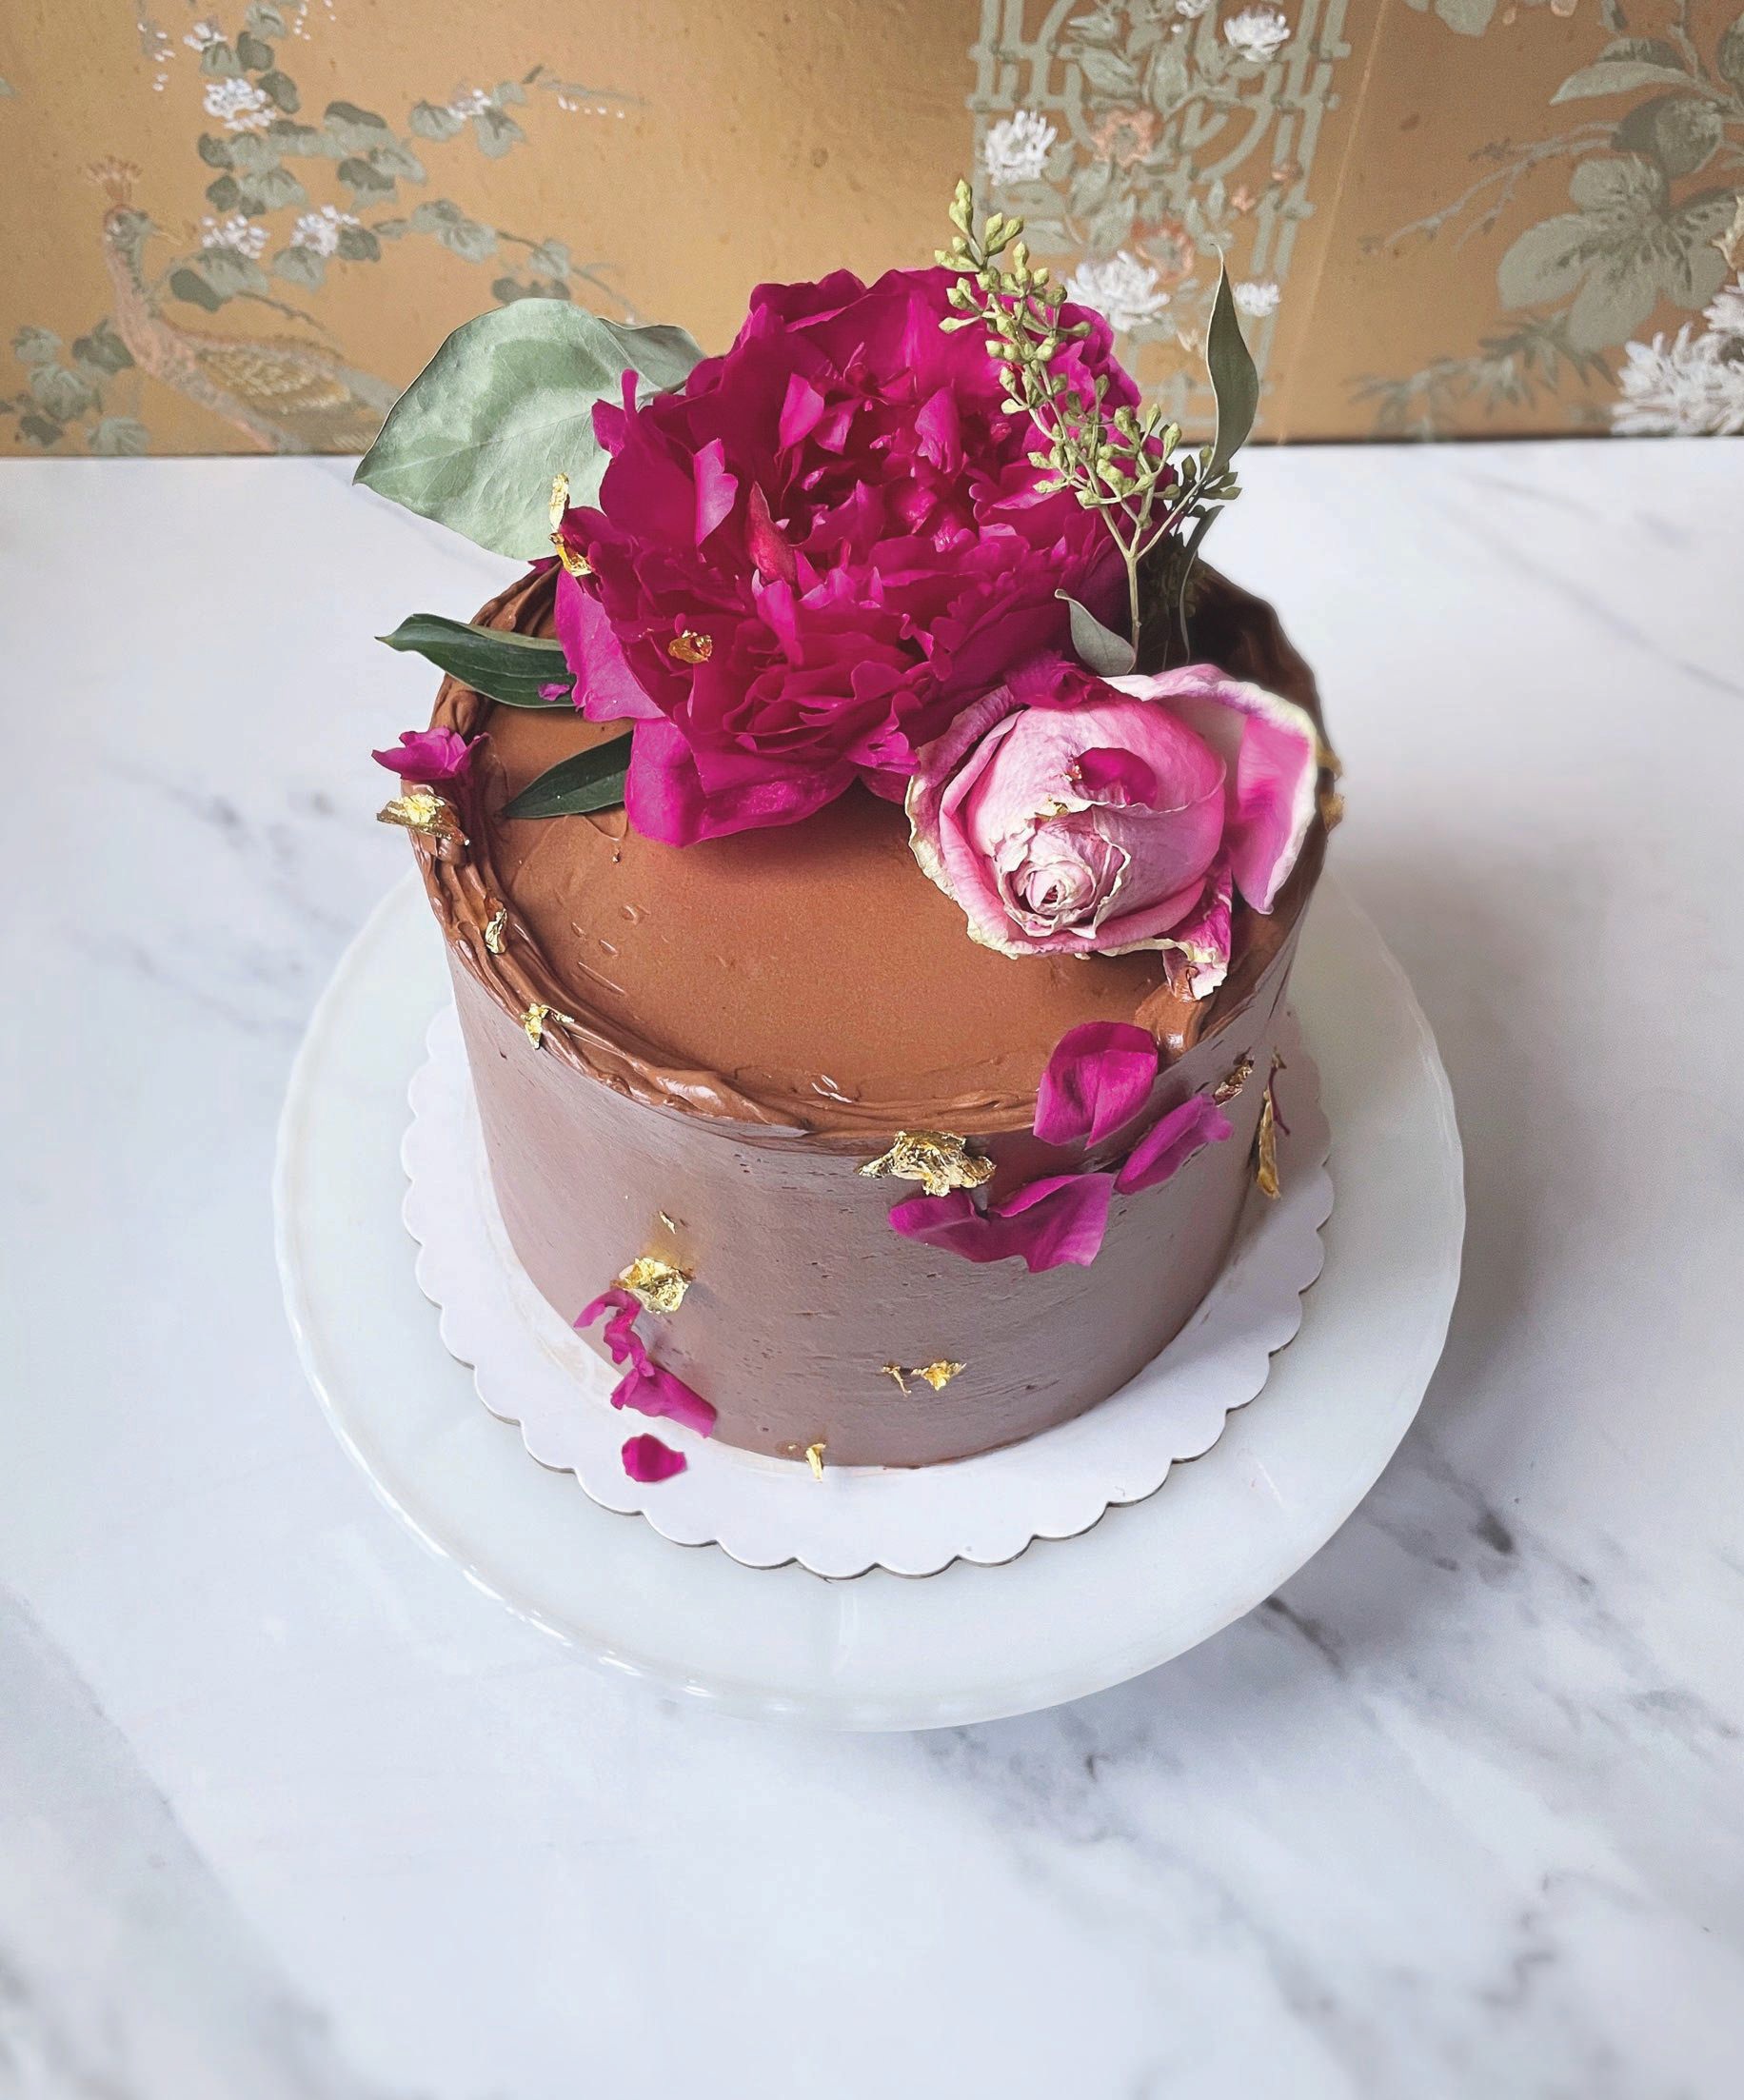 A blooming rose, petals, greenery and gold leaf sprinkle the top of this festive gateau. PHOTO BY NOELLE BLIZZARD